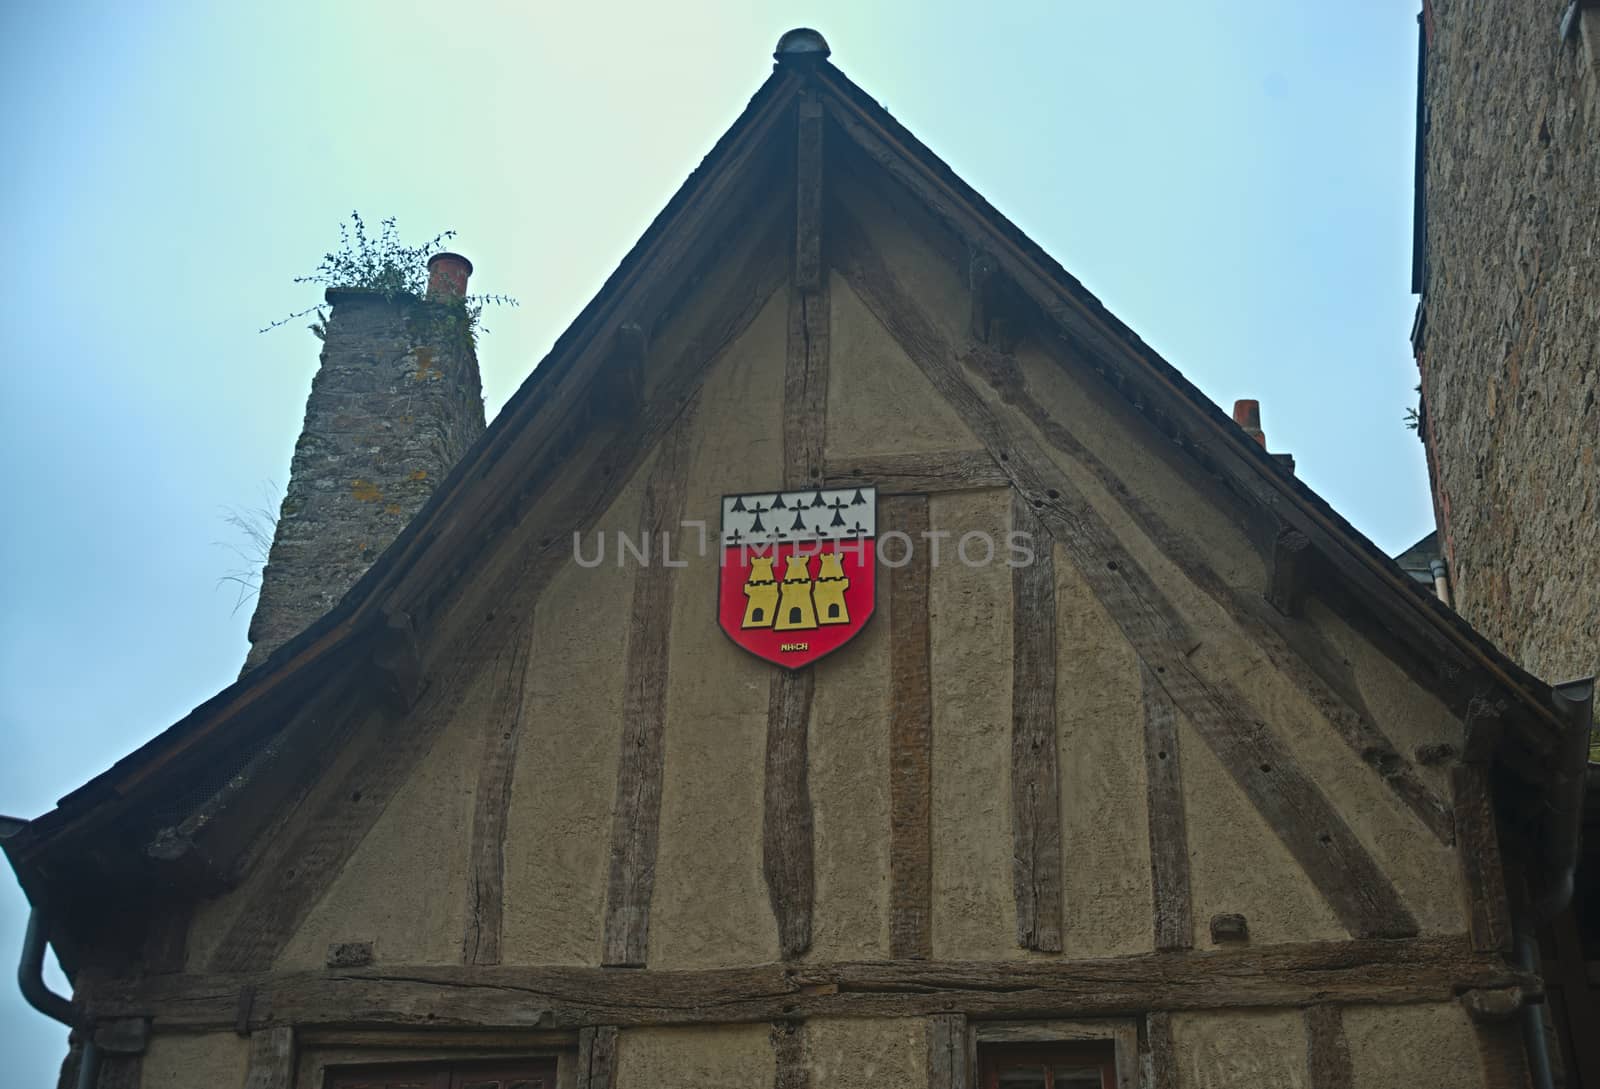 Fully restored old medieval traditional house in Dinan, France